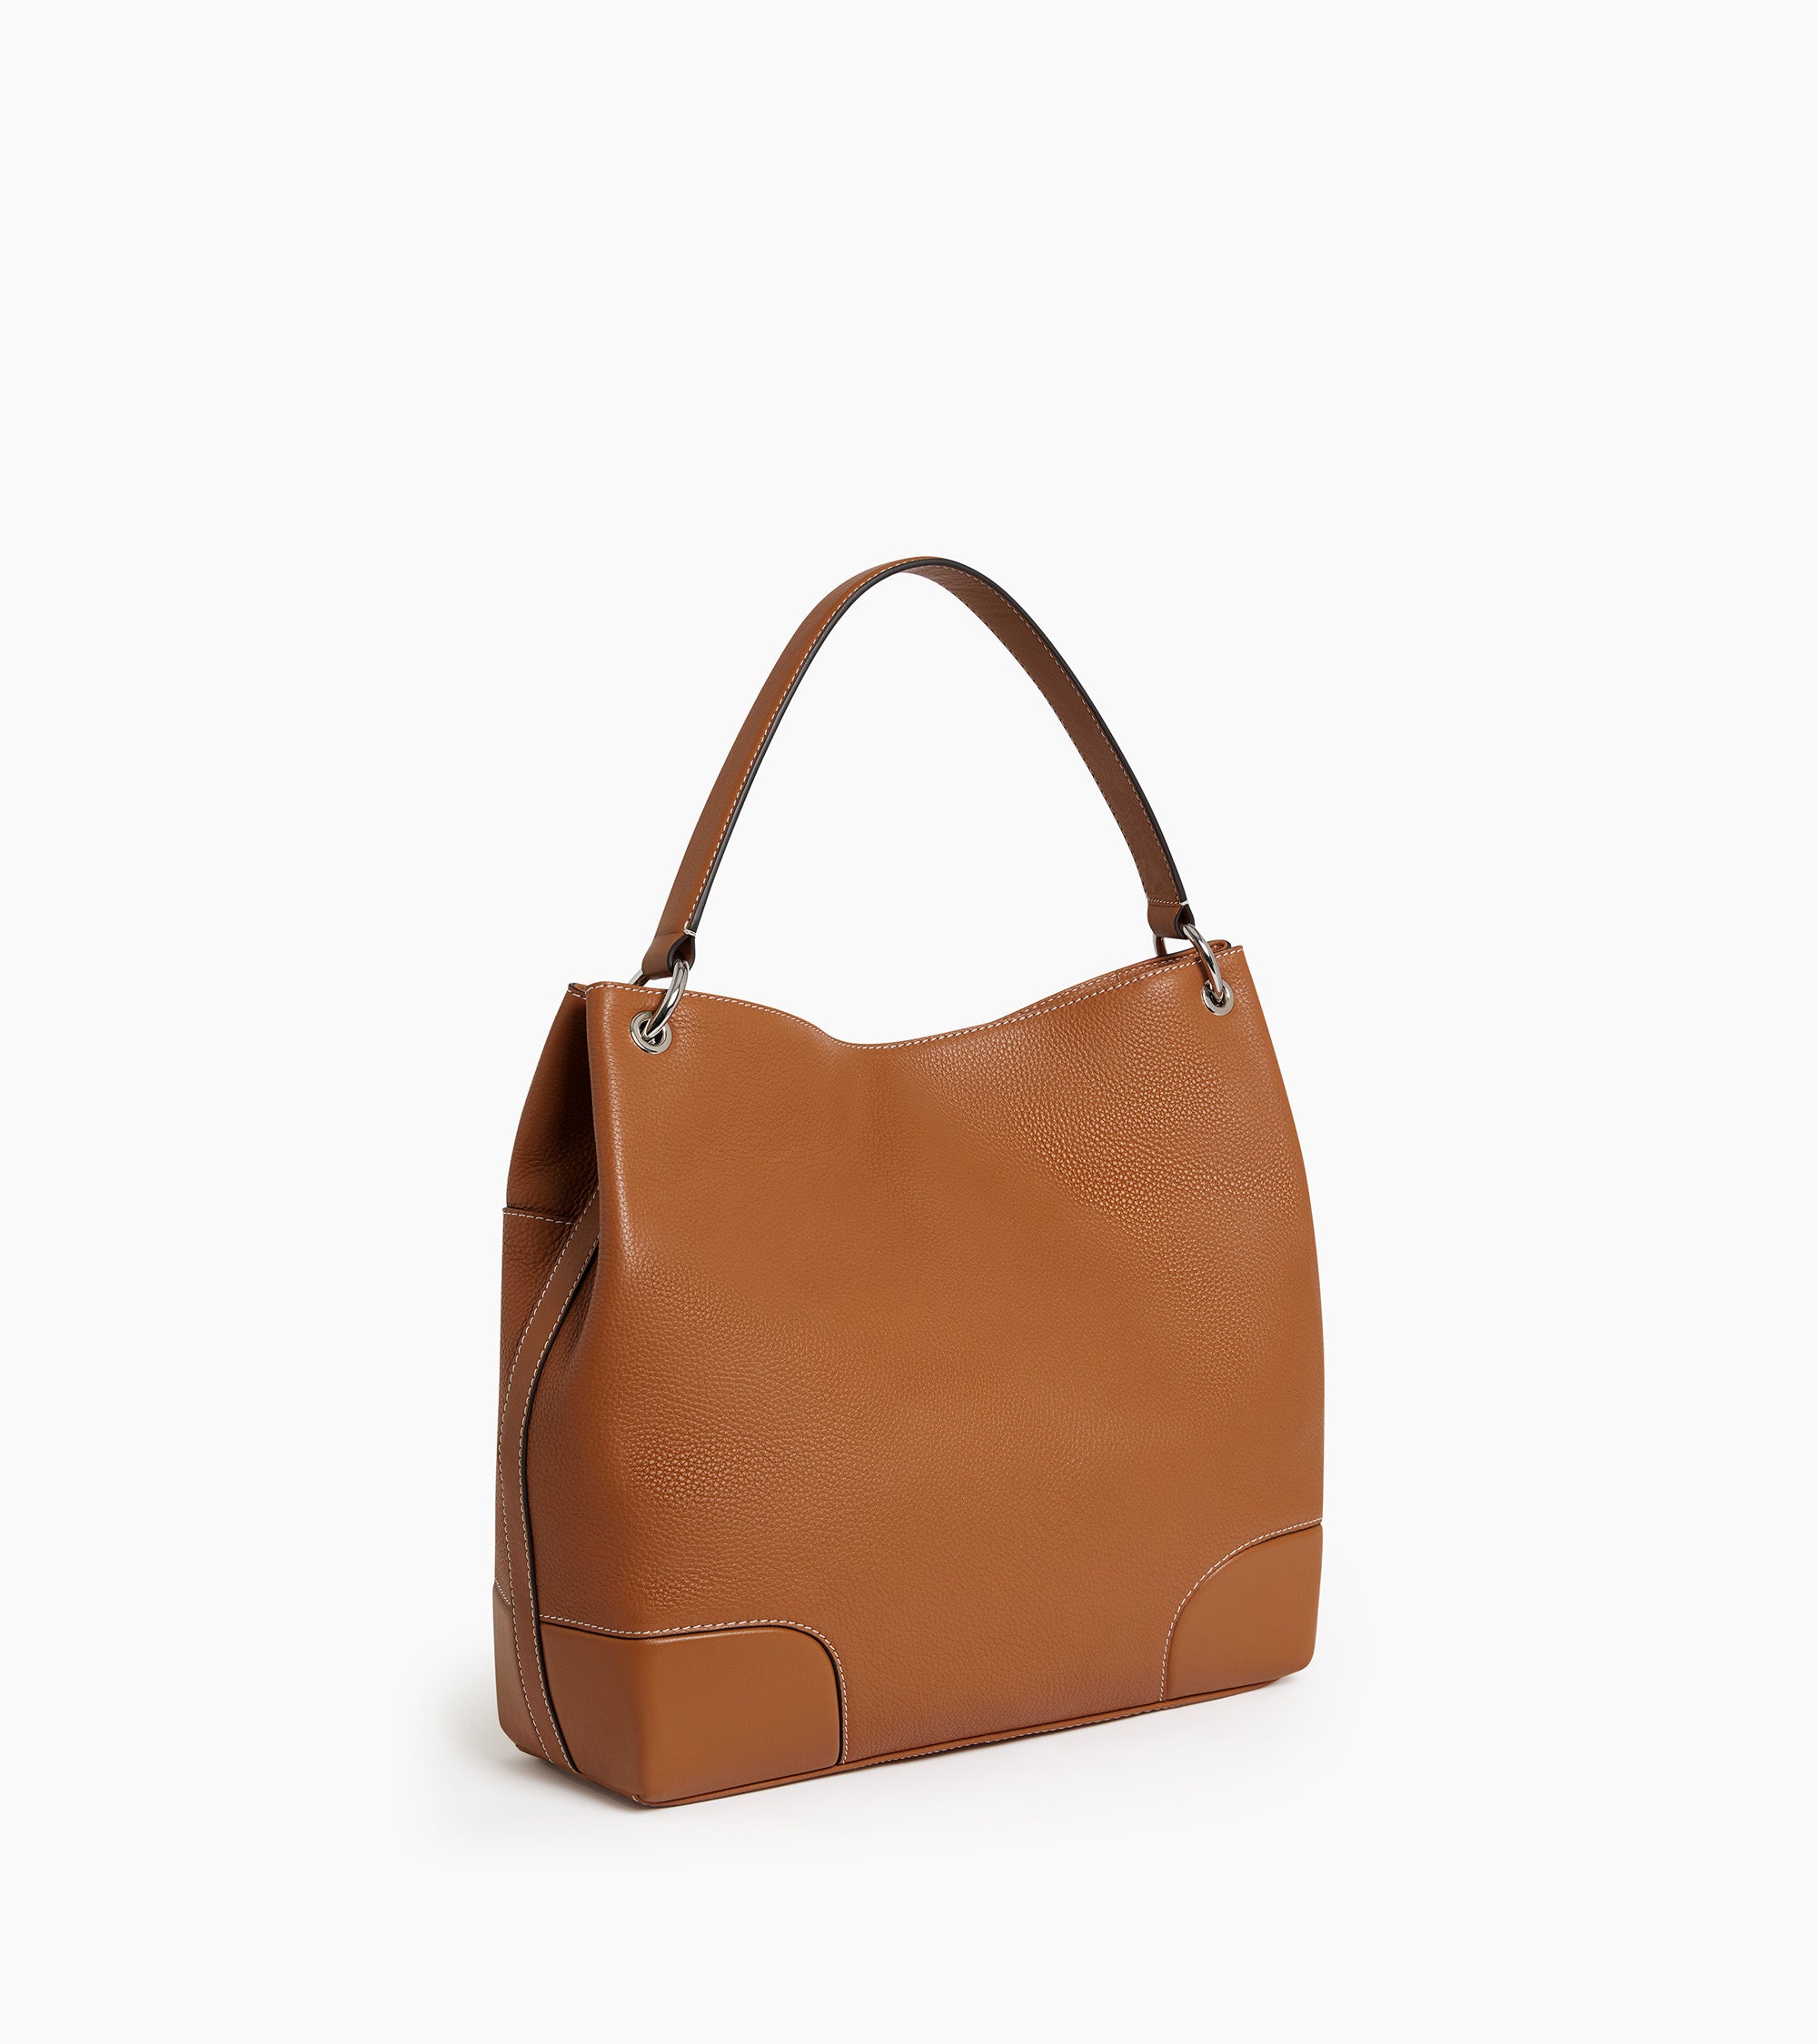 Romy large hobo bag in smooth and grained leather